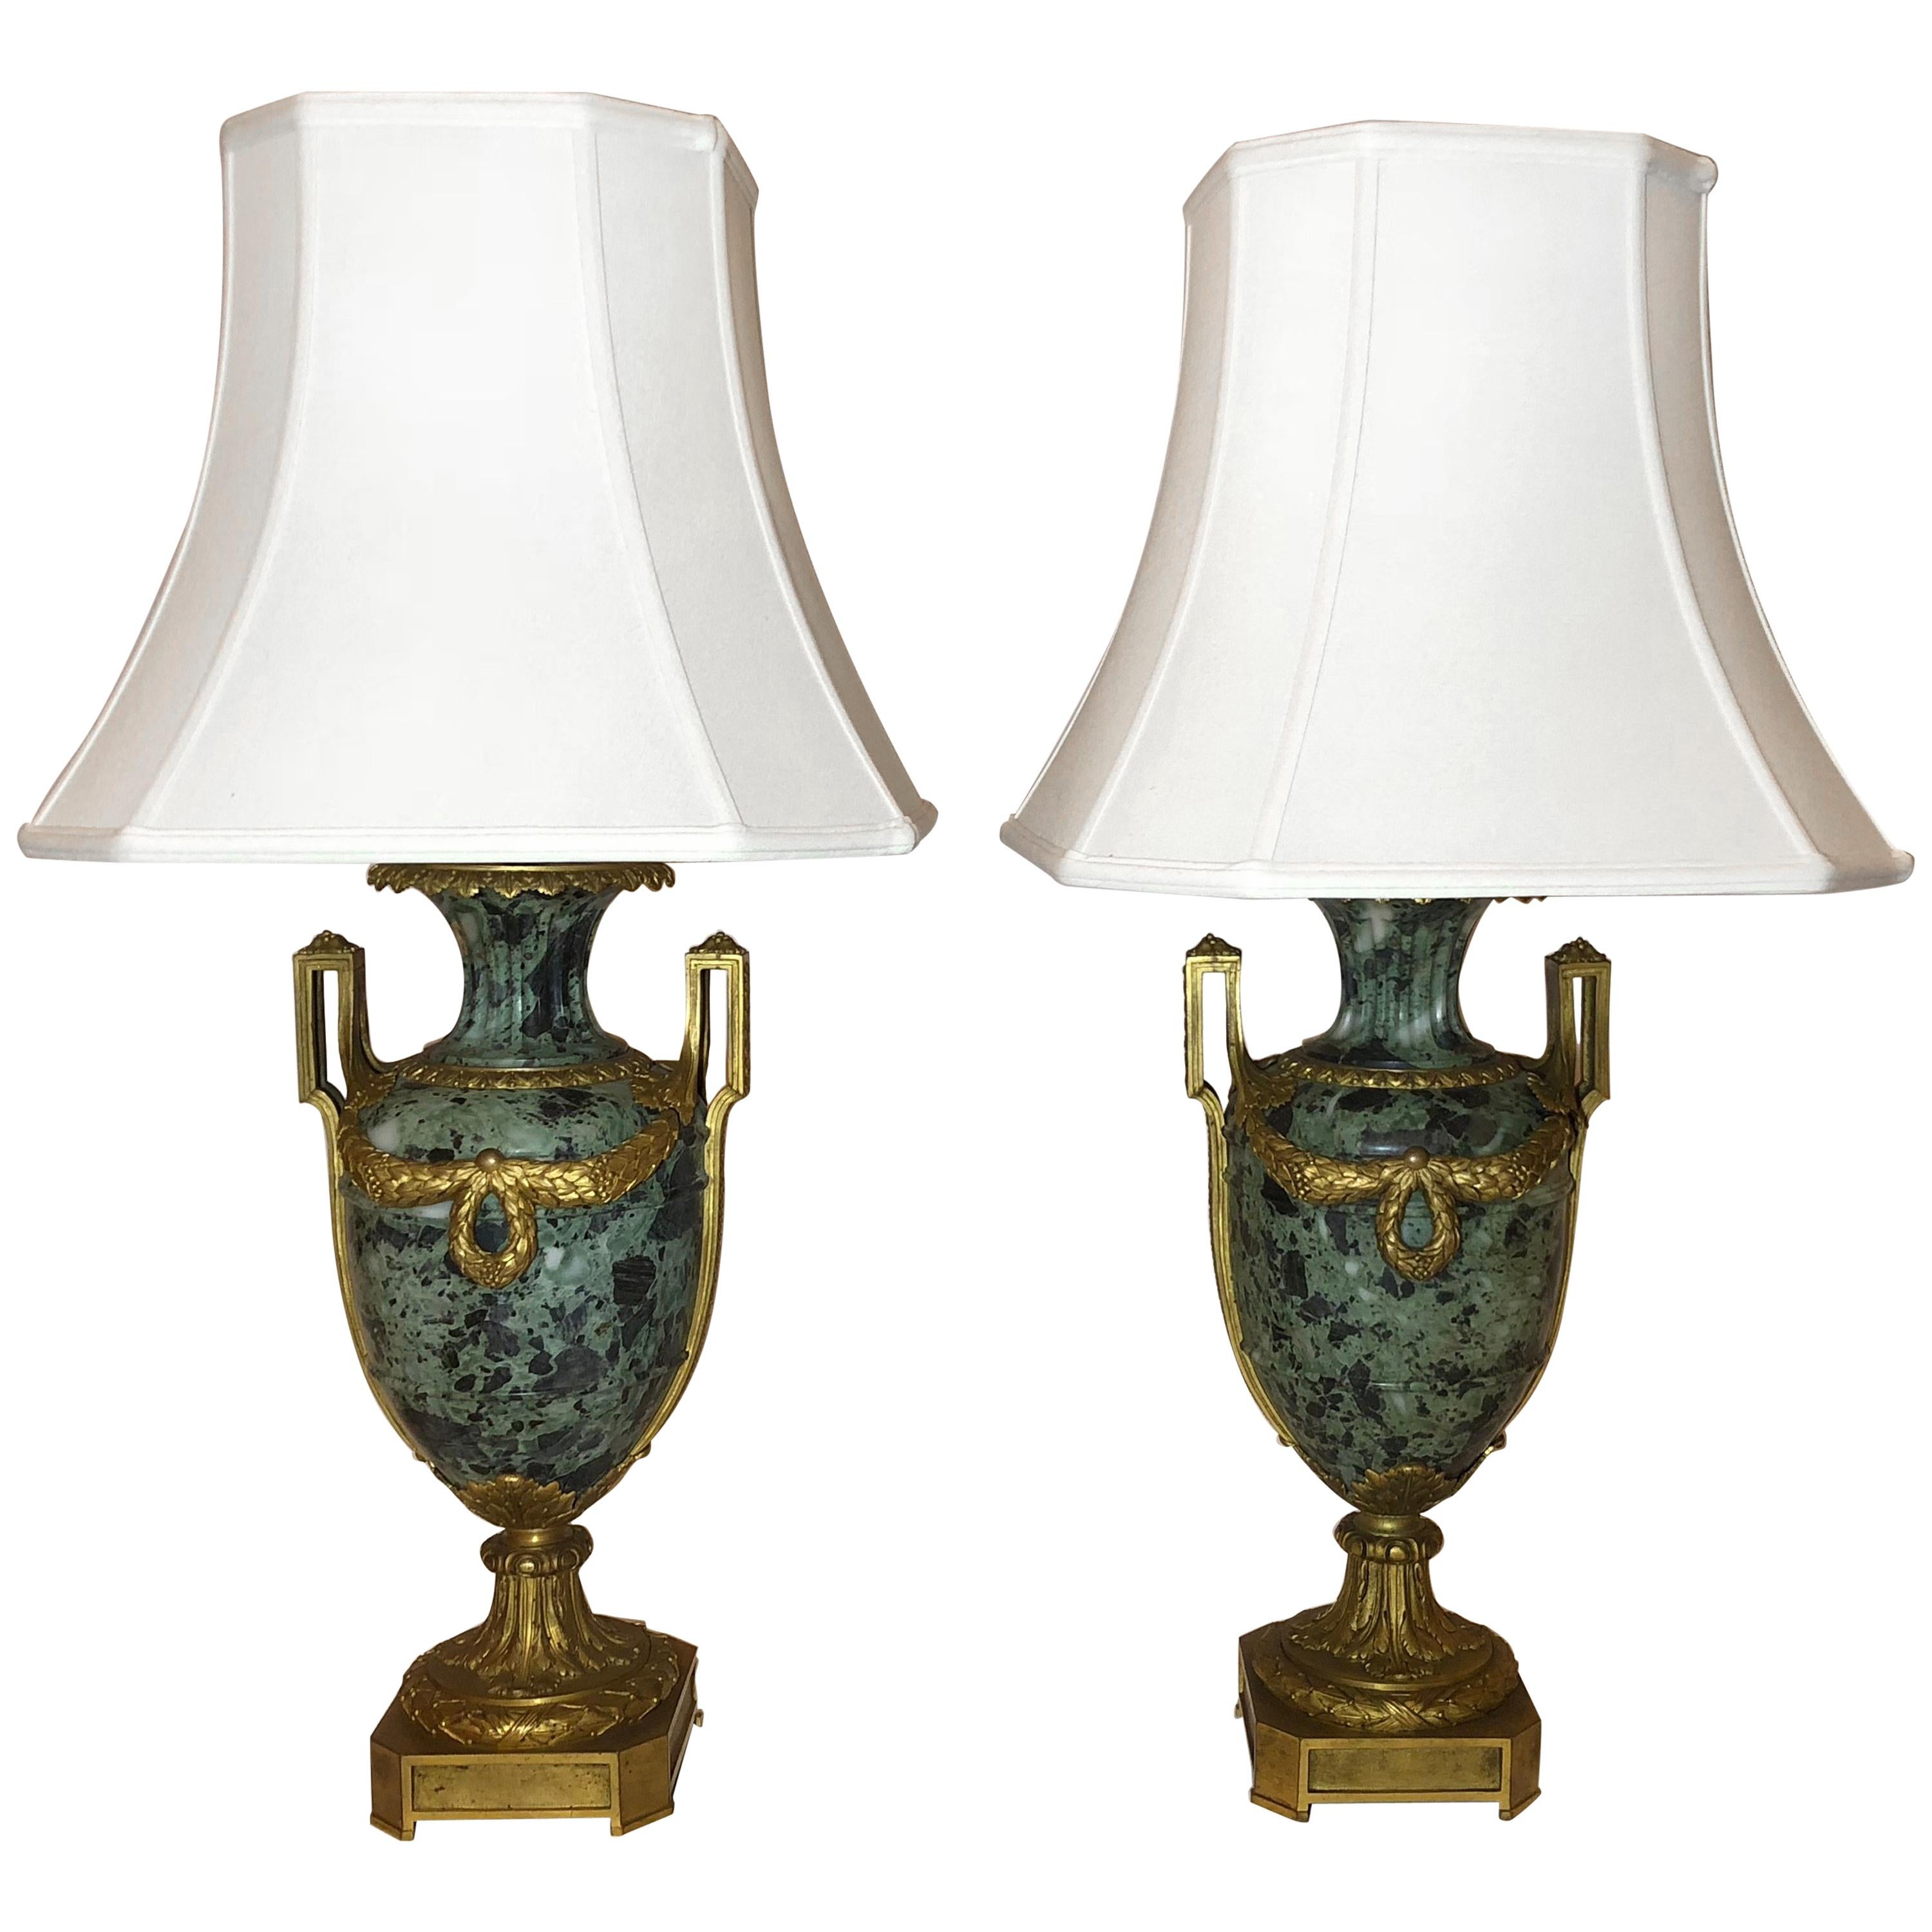 Antique French Verde Marble and Ormolu Lamps, circa 1850-1860